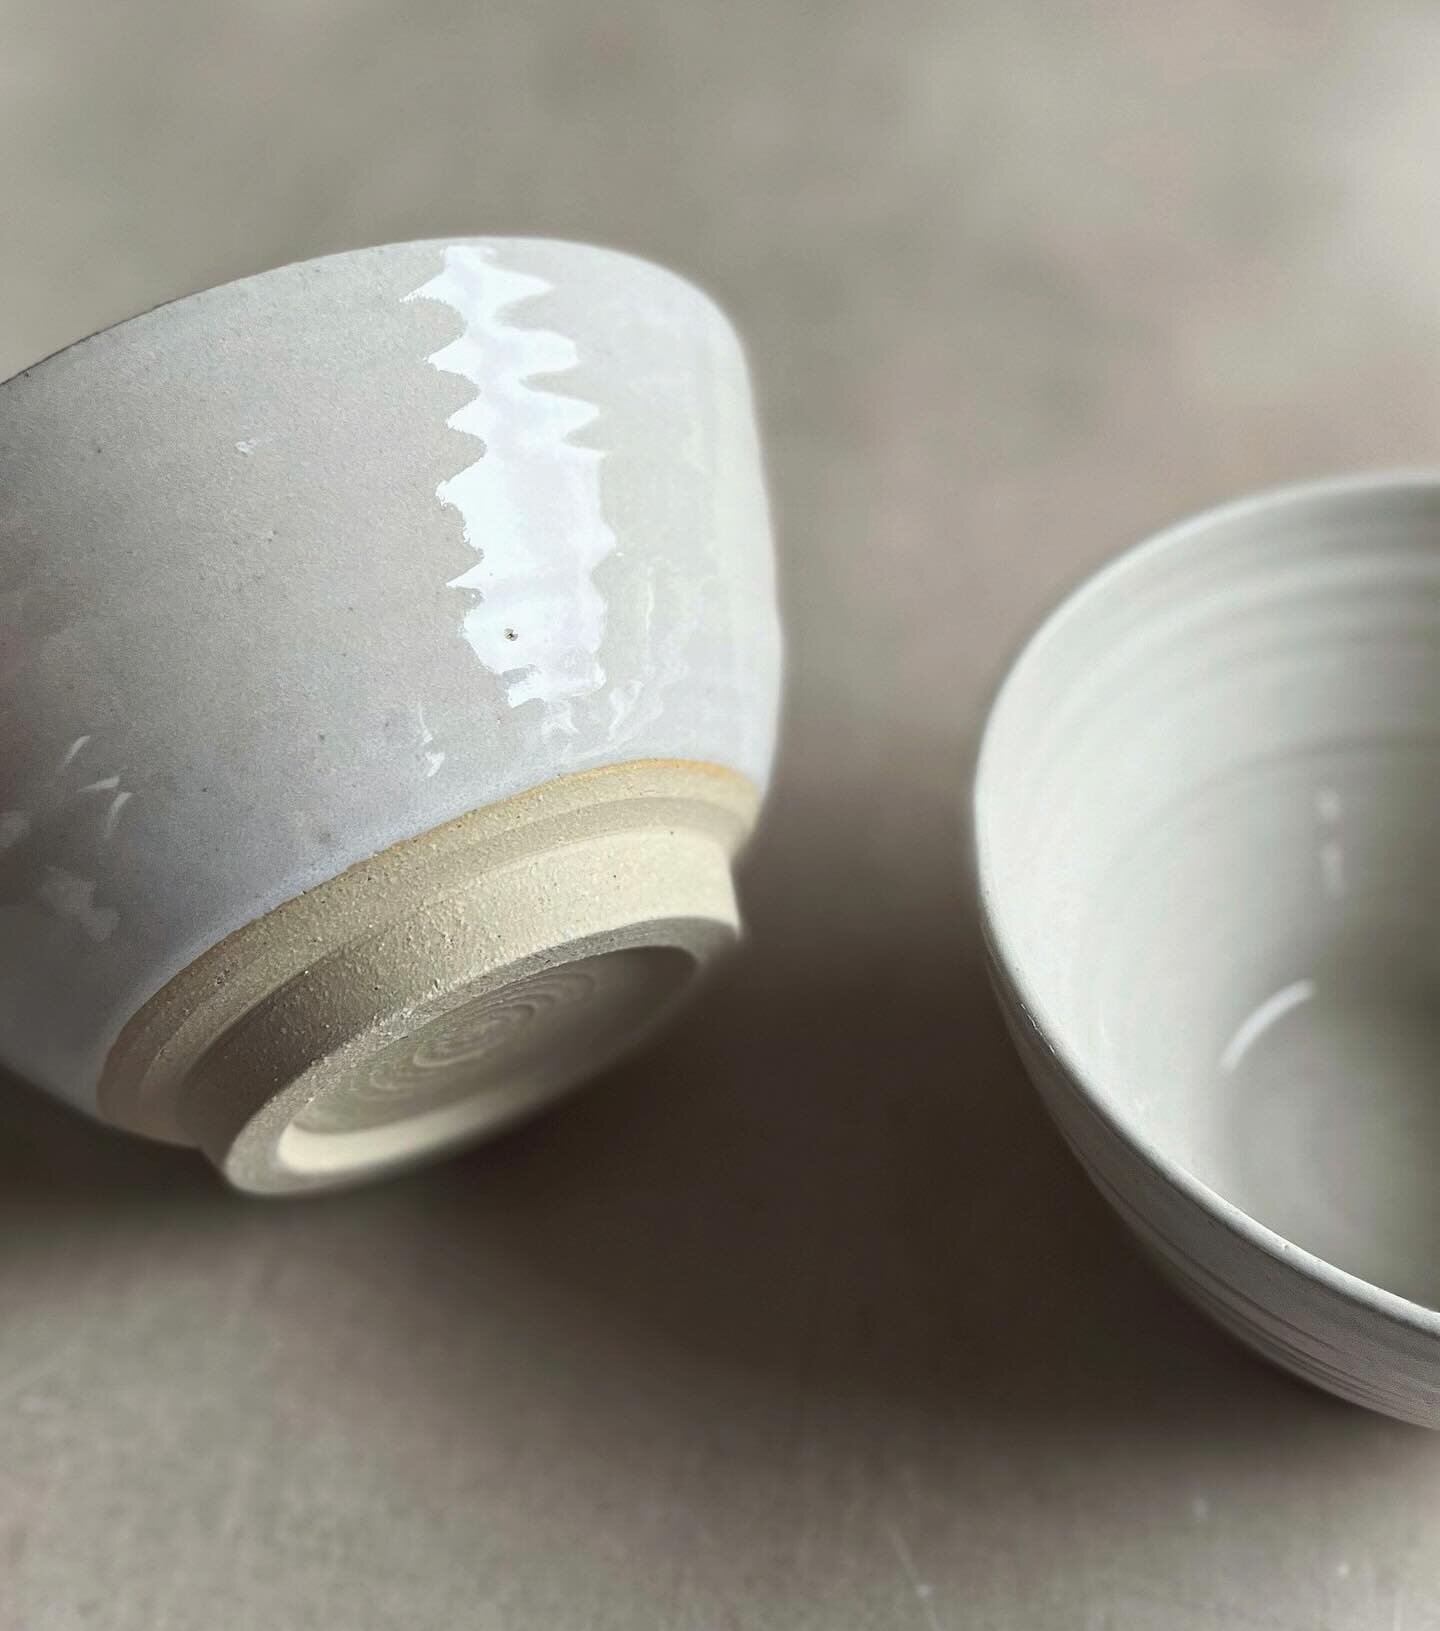 Deep footed noodle bowls made with a clay blend of stoneware x crank clay. Great for all your broth dreams or ambitious cereal endeavours. Glazed in a really lovely glossy white.

Just two more hours before my first web-shop launch of the year 🌟 I&r